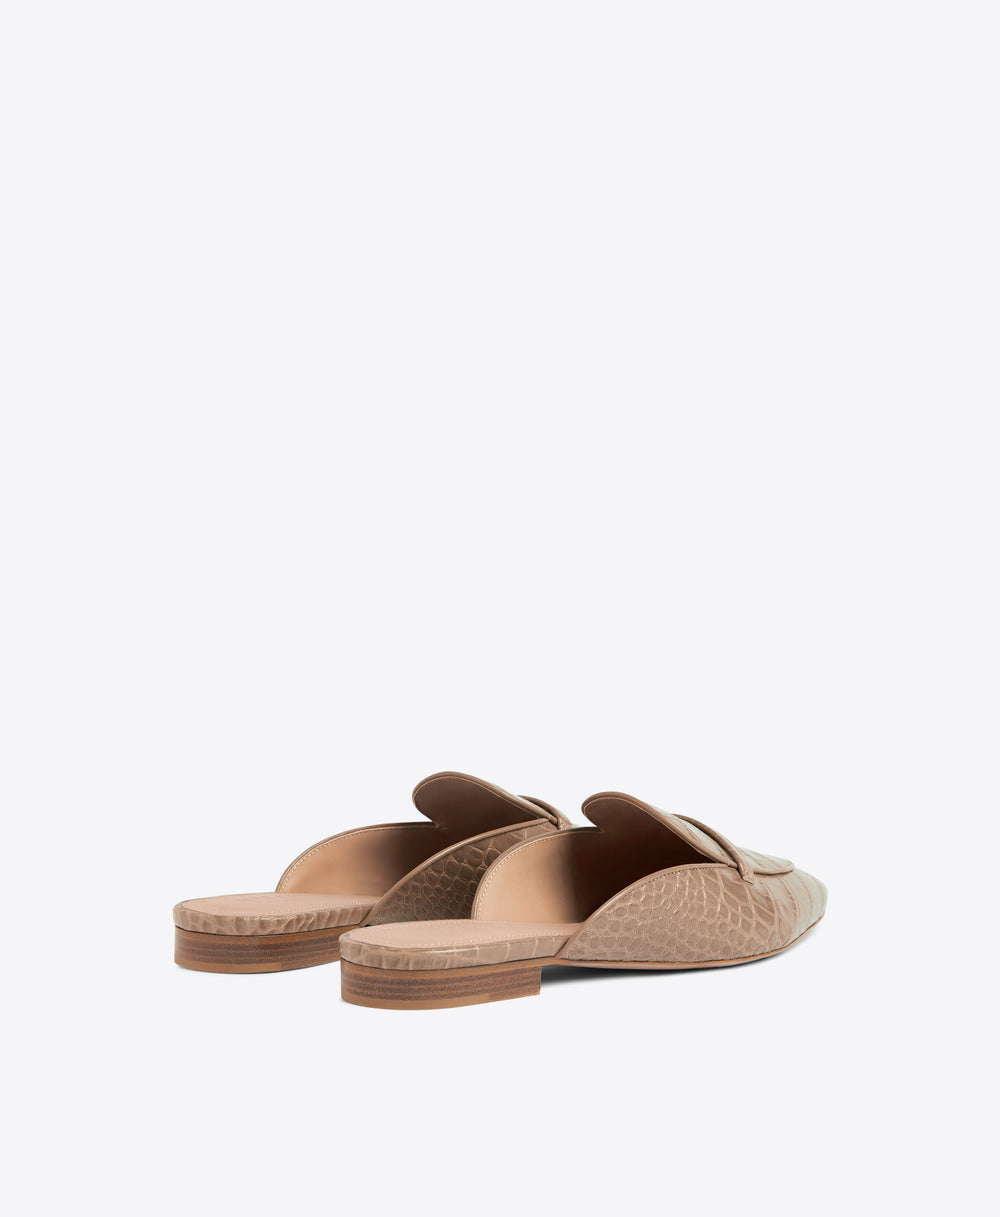 Malone Souliers Berto Taupe Embossed Leather Flat Slides